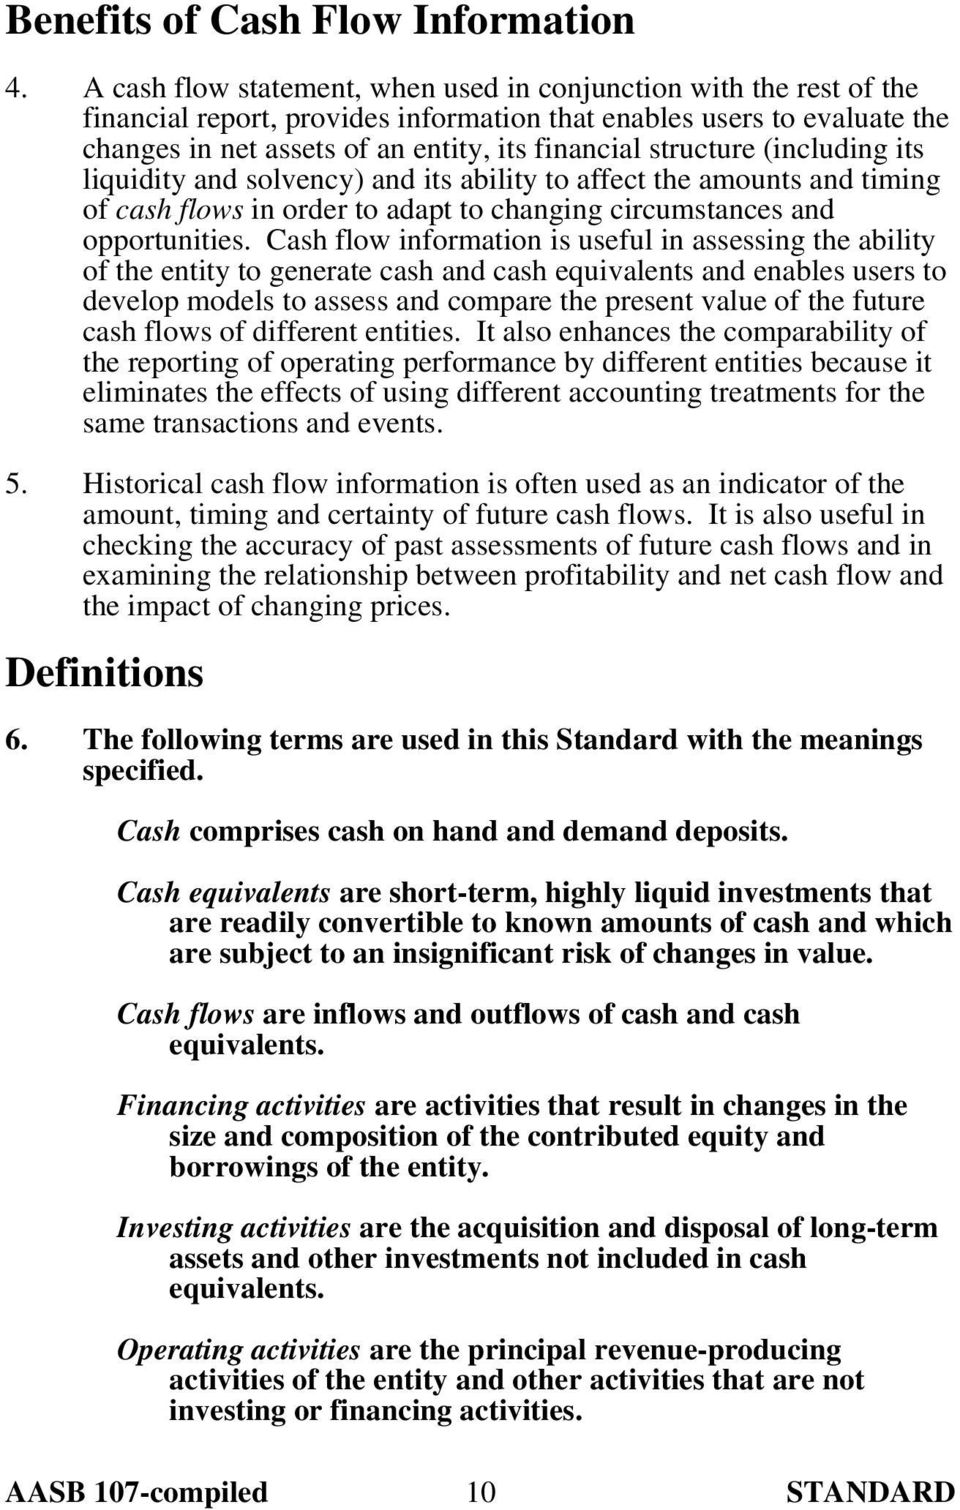 structure (including its liquidity and solvency) and its ability to affect the amounts and timing of cash flows in order to adapt to changing circumstances and opportunities.